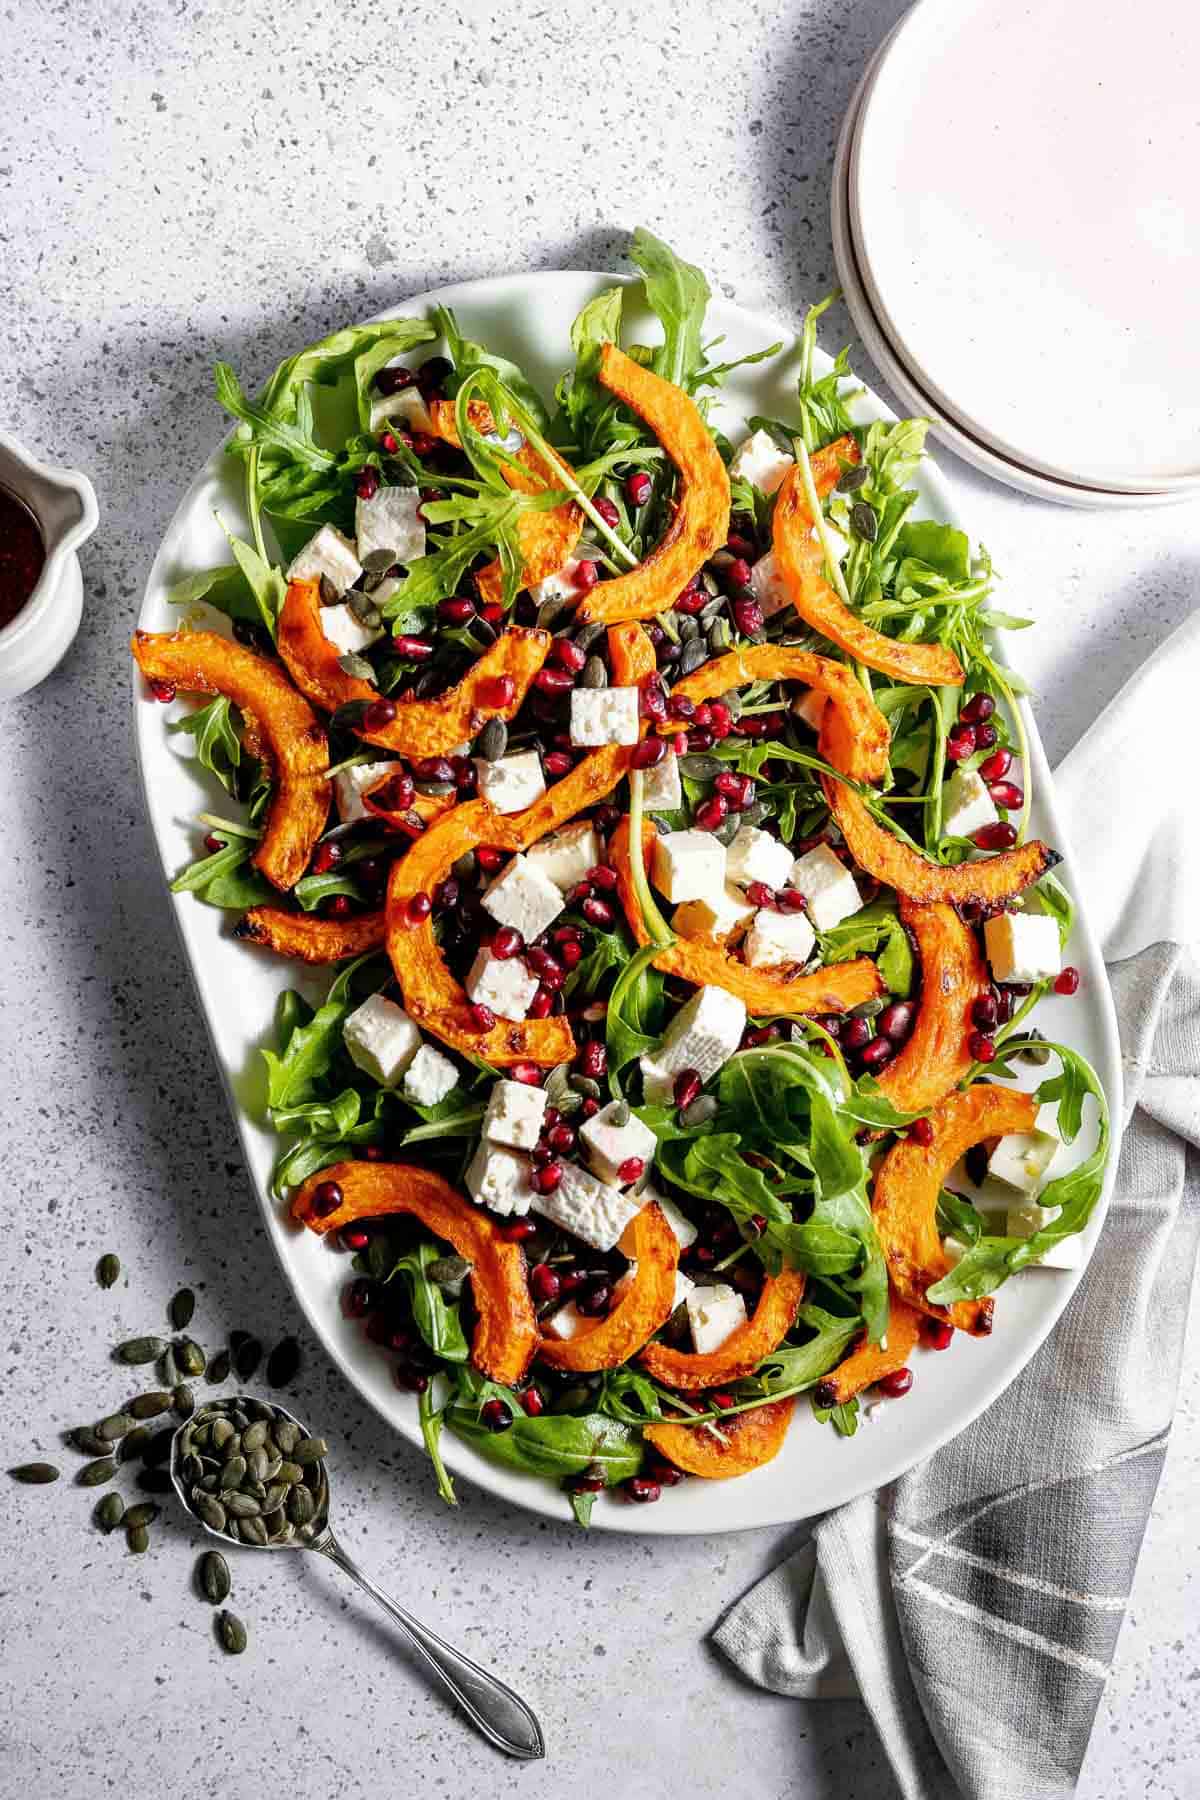 Roasted butternut squash salad with feta and pomegranate seeds.